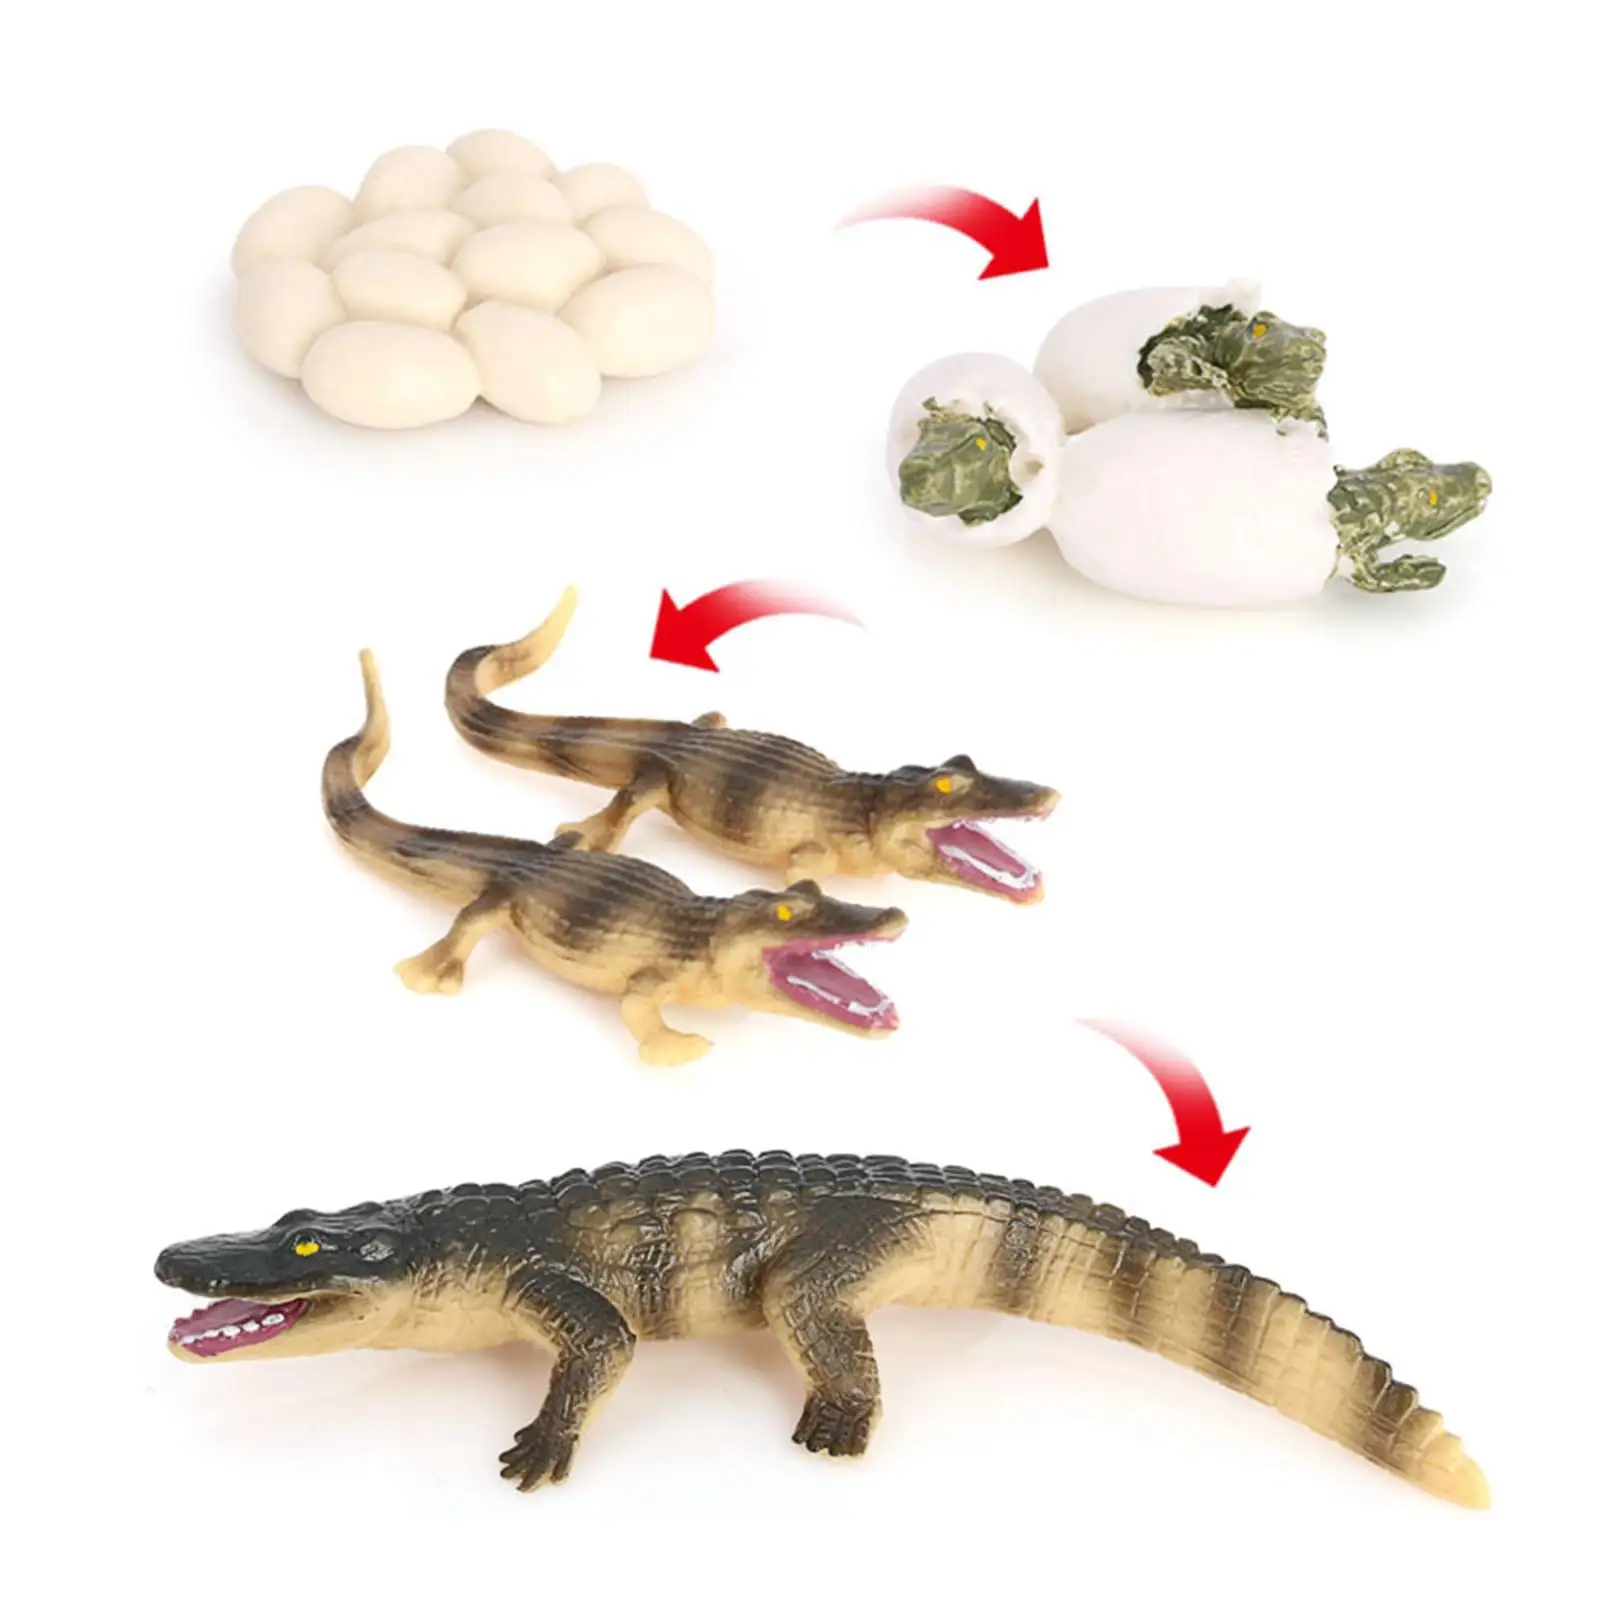 Assorted Plastic Insects Crocodile Bugs Figures Model Kids Educational Toys